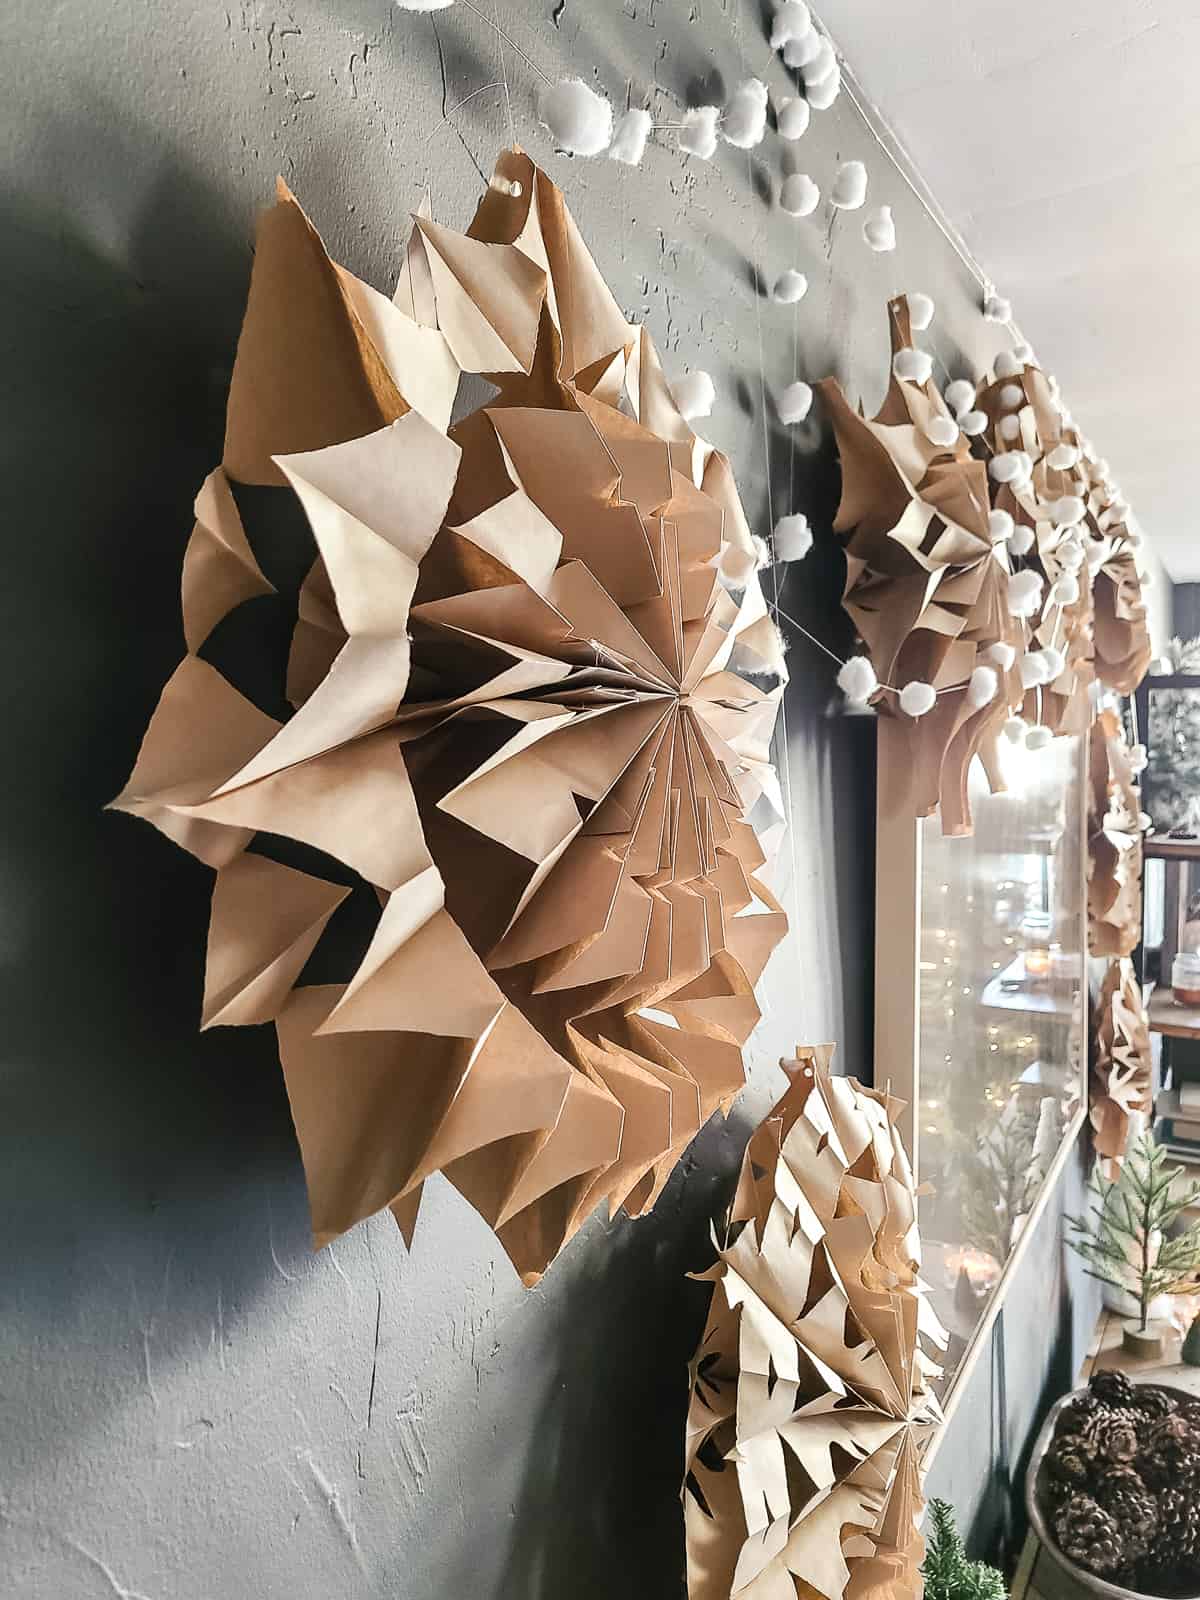 DIY Winter Craft Project: How To Make A Paper Snowflake